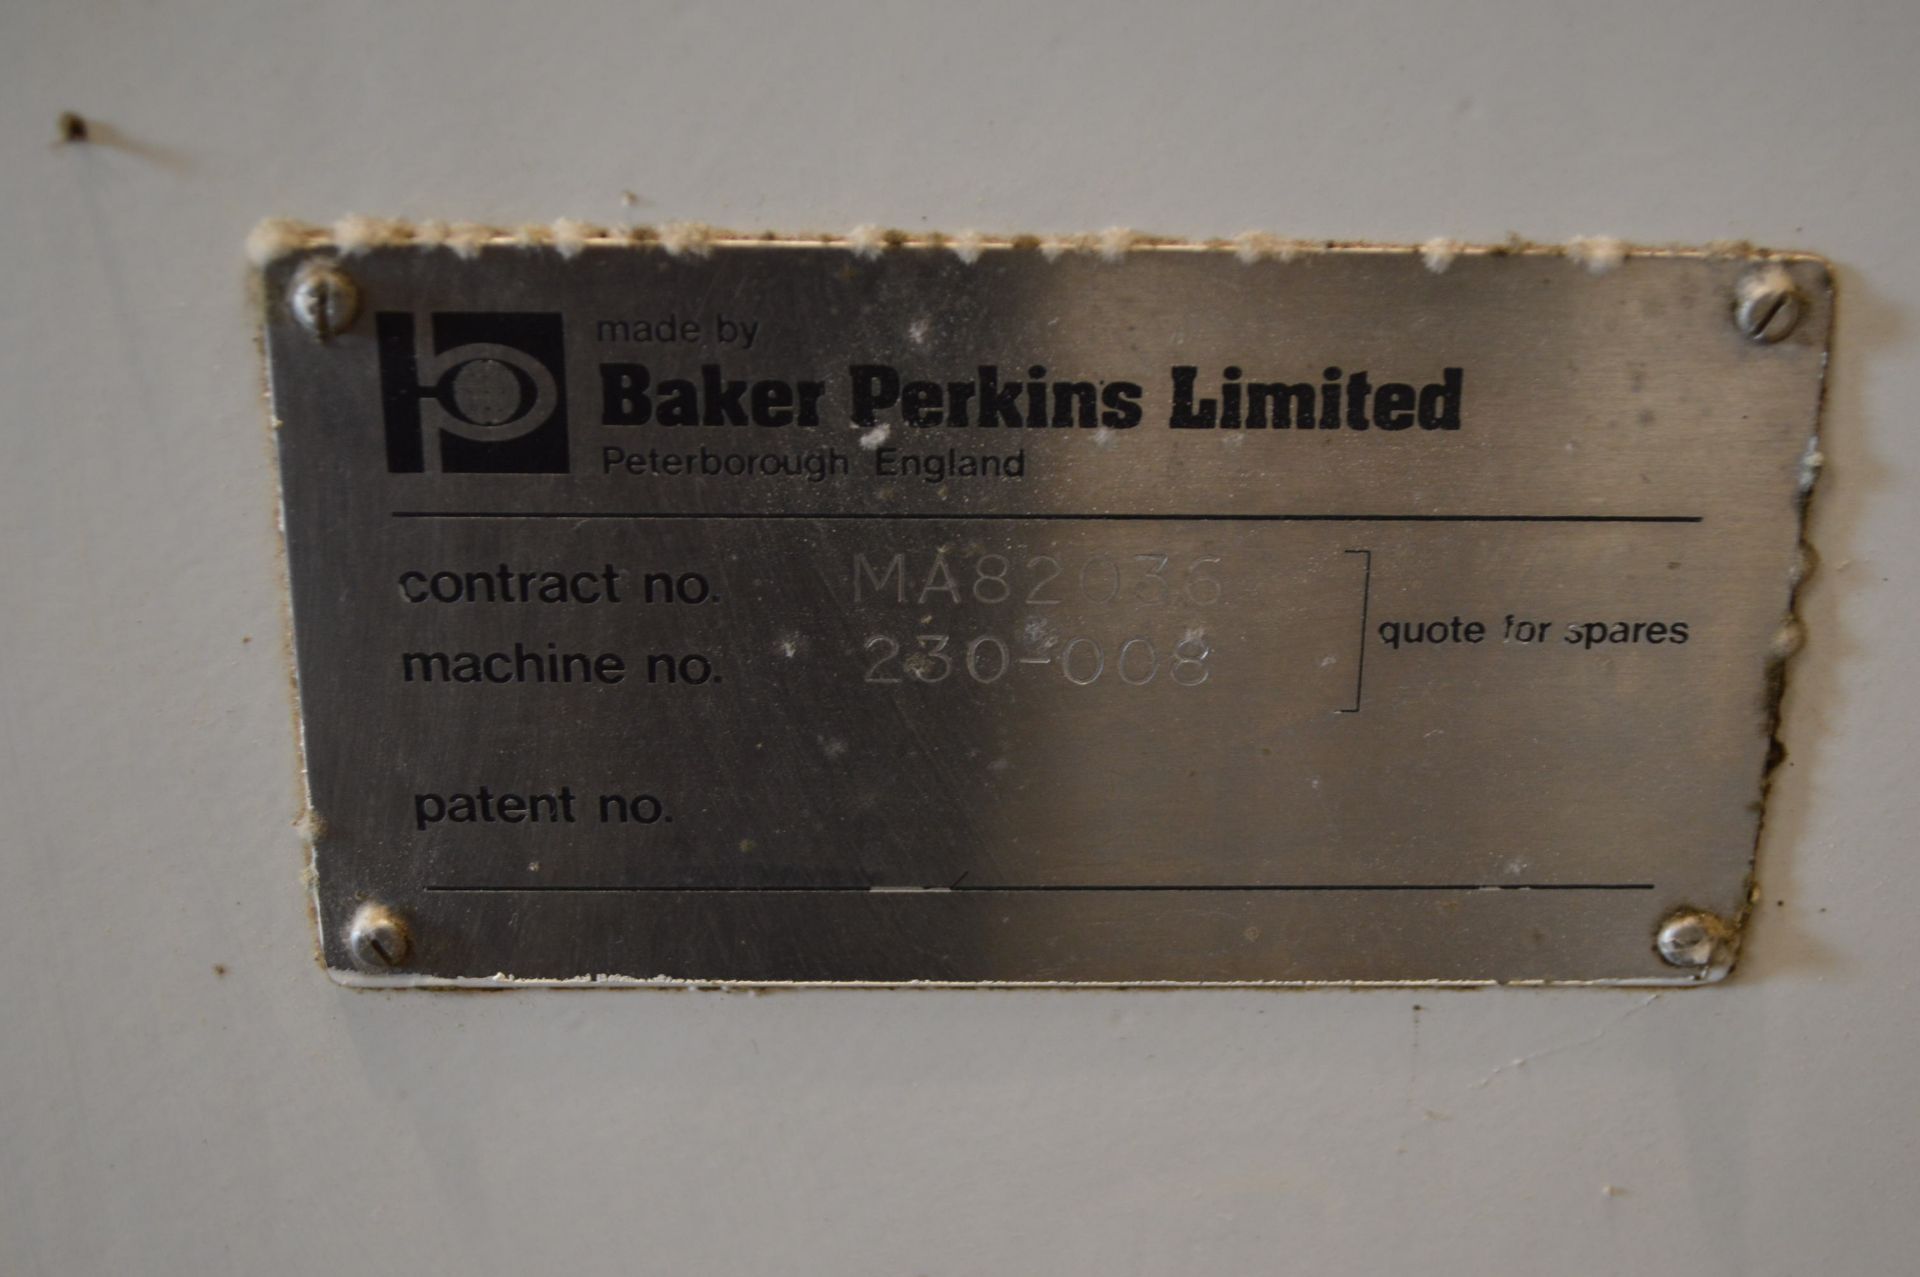 Baker Perkins ACE 200S Single Screw Extruder, serial no. 230-008 - Image 3 of 3